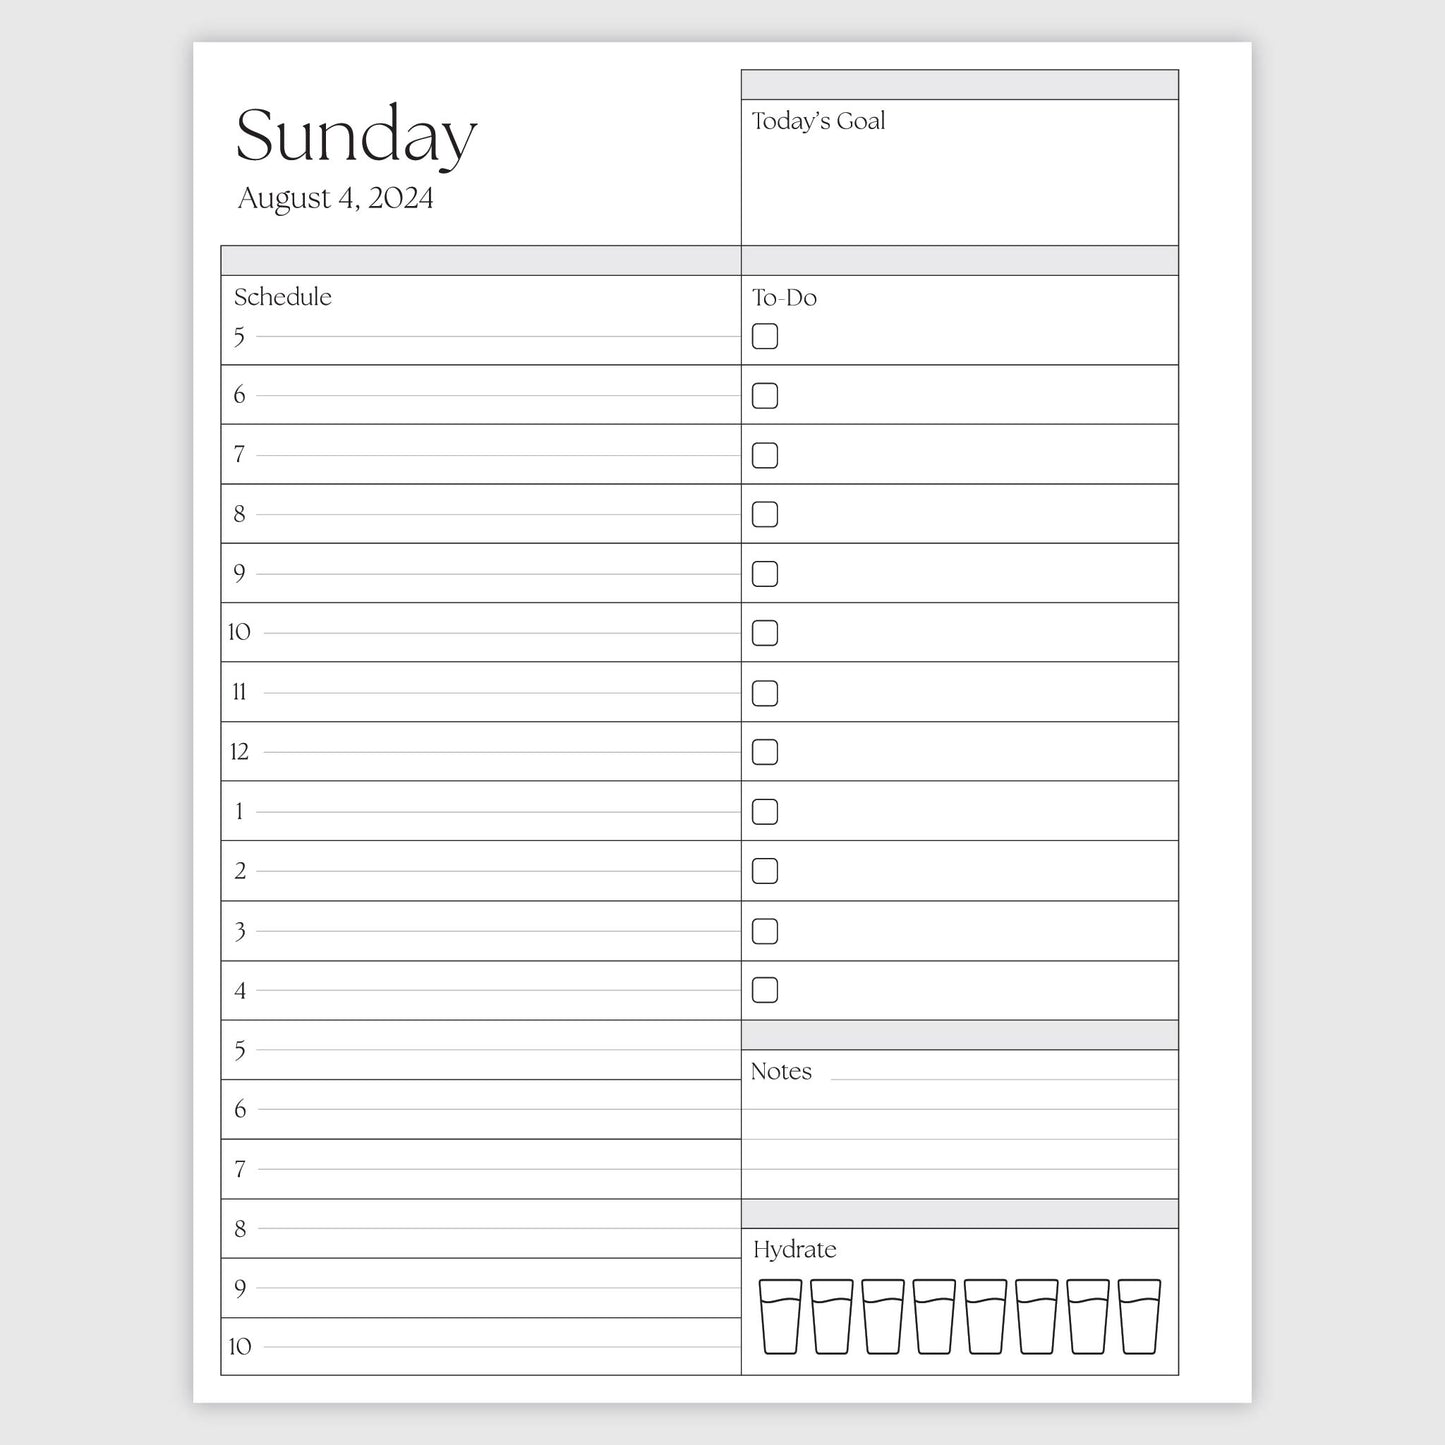 The Works Daily Planner - Palms